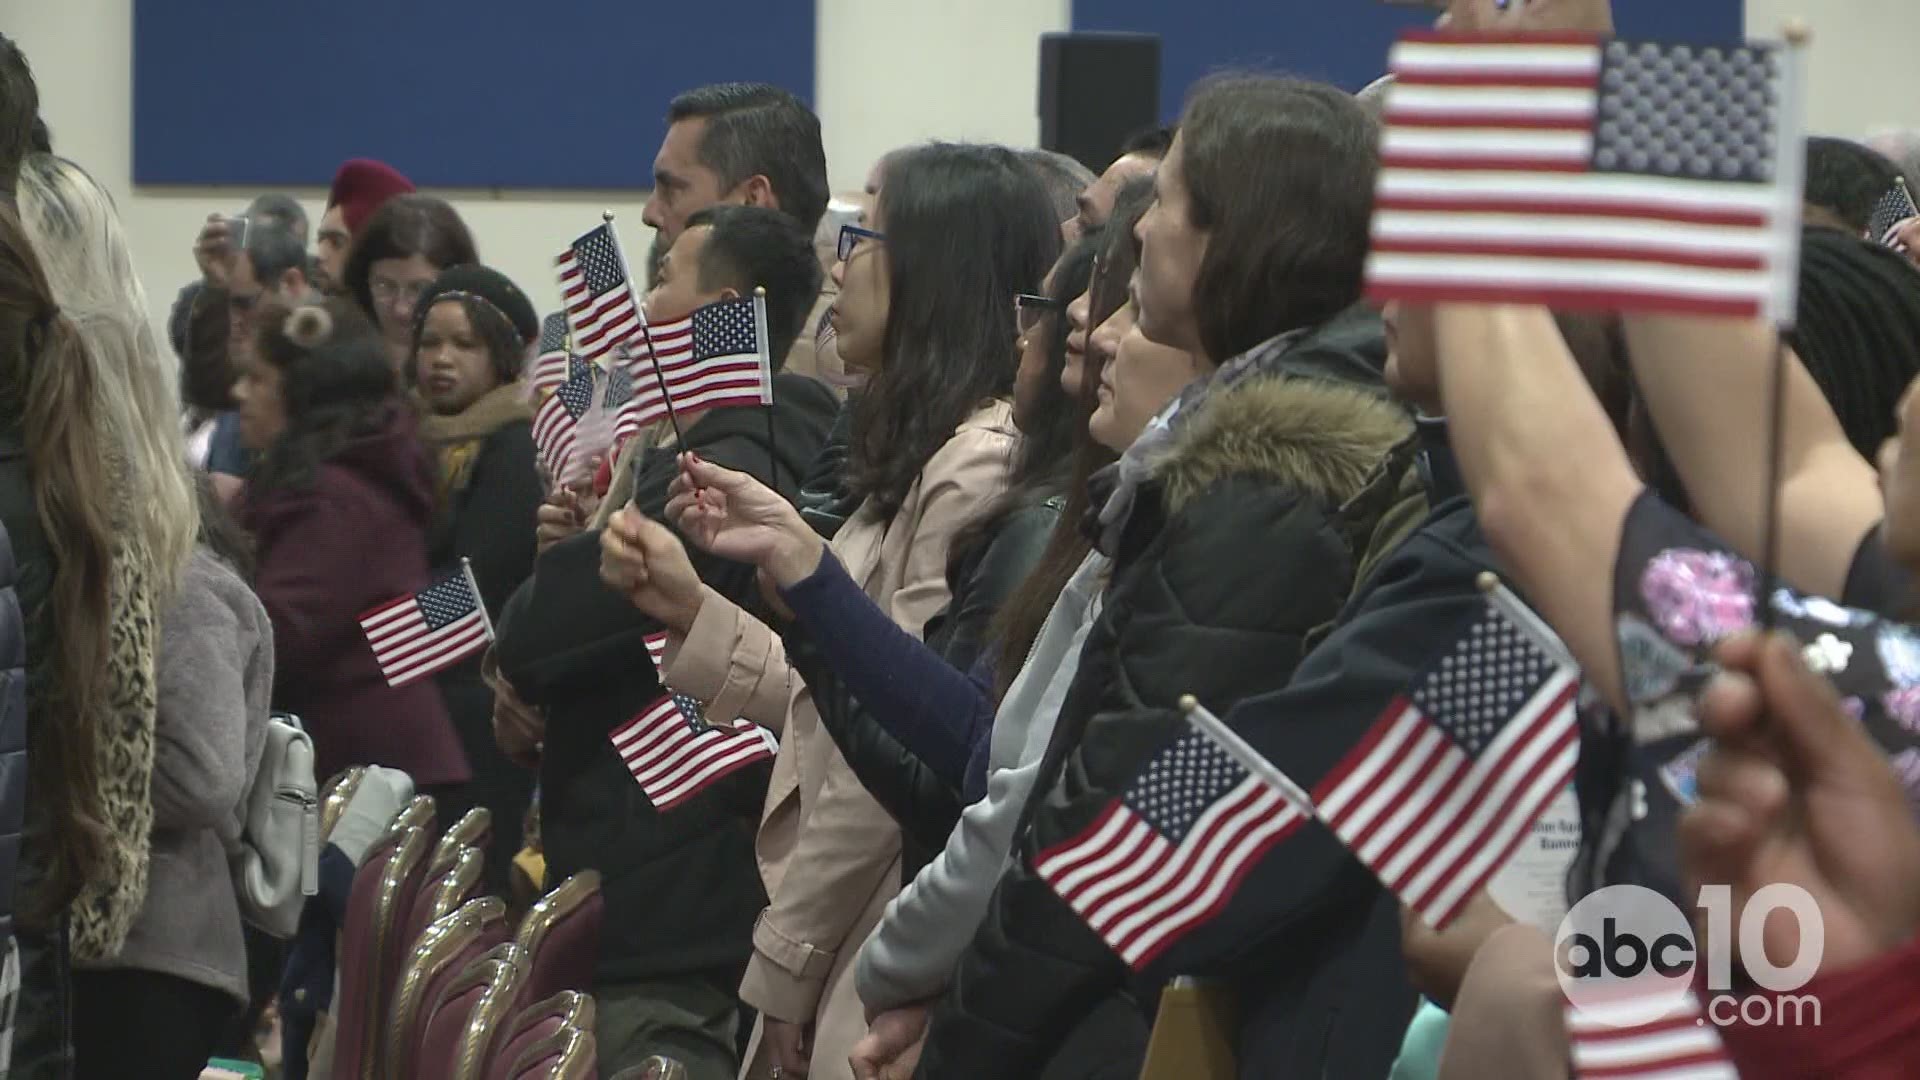 Around 900 people were sworn in as United States citizens Wednesday, in two ceremonies held by U.S. Citizenship and Immigration Services. The proud event happening on day 33 of a partial government shutdown, with a border wall at it's center.